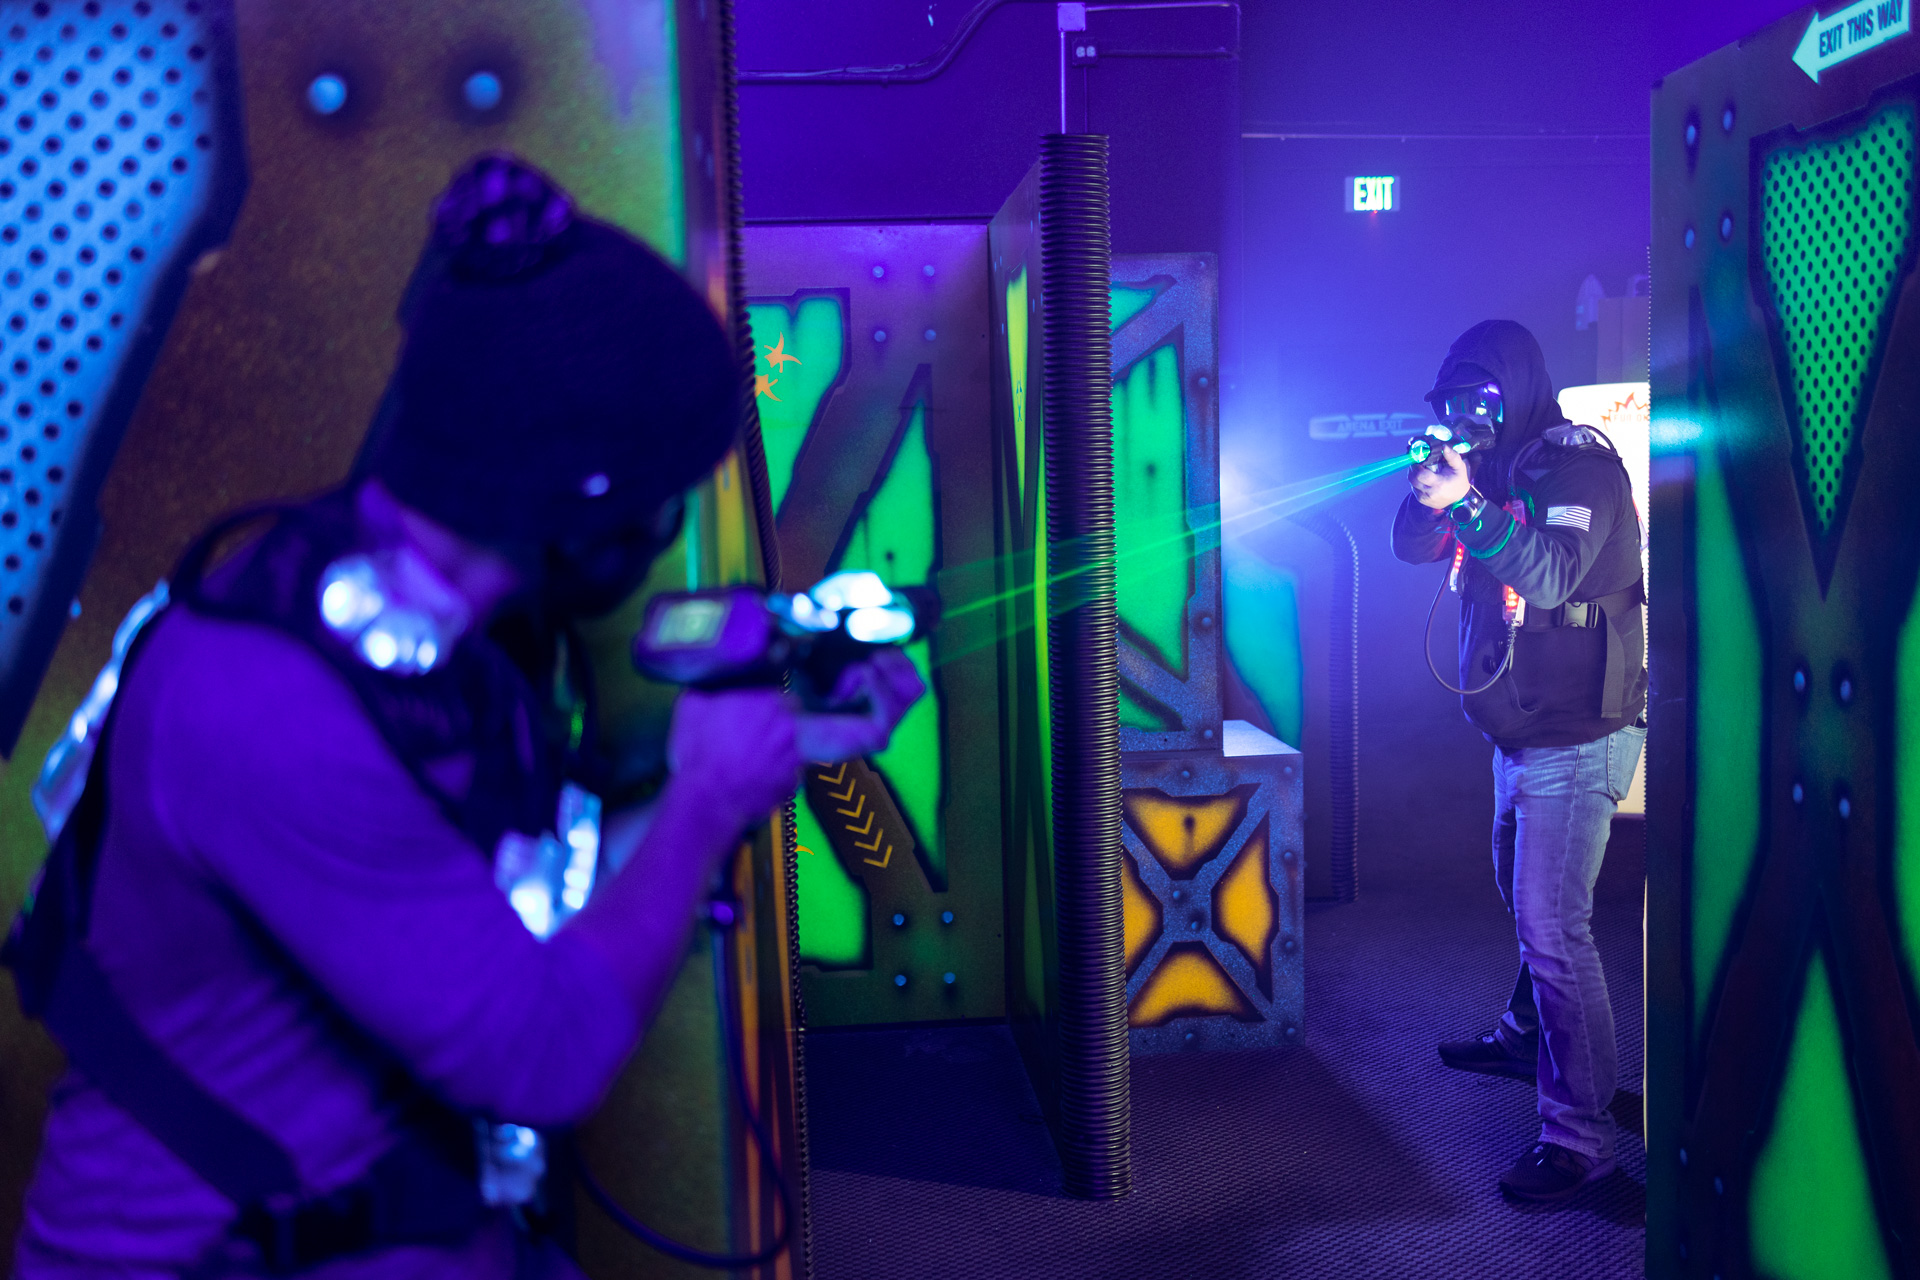 Two people playing laser tag in an arena zapping each other from across the room with the bright green auora laser.